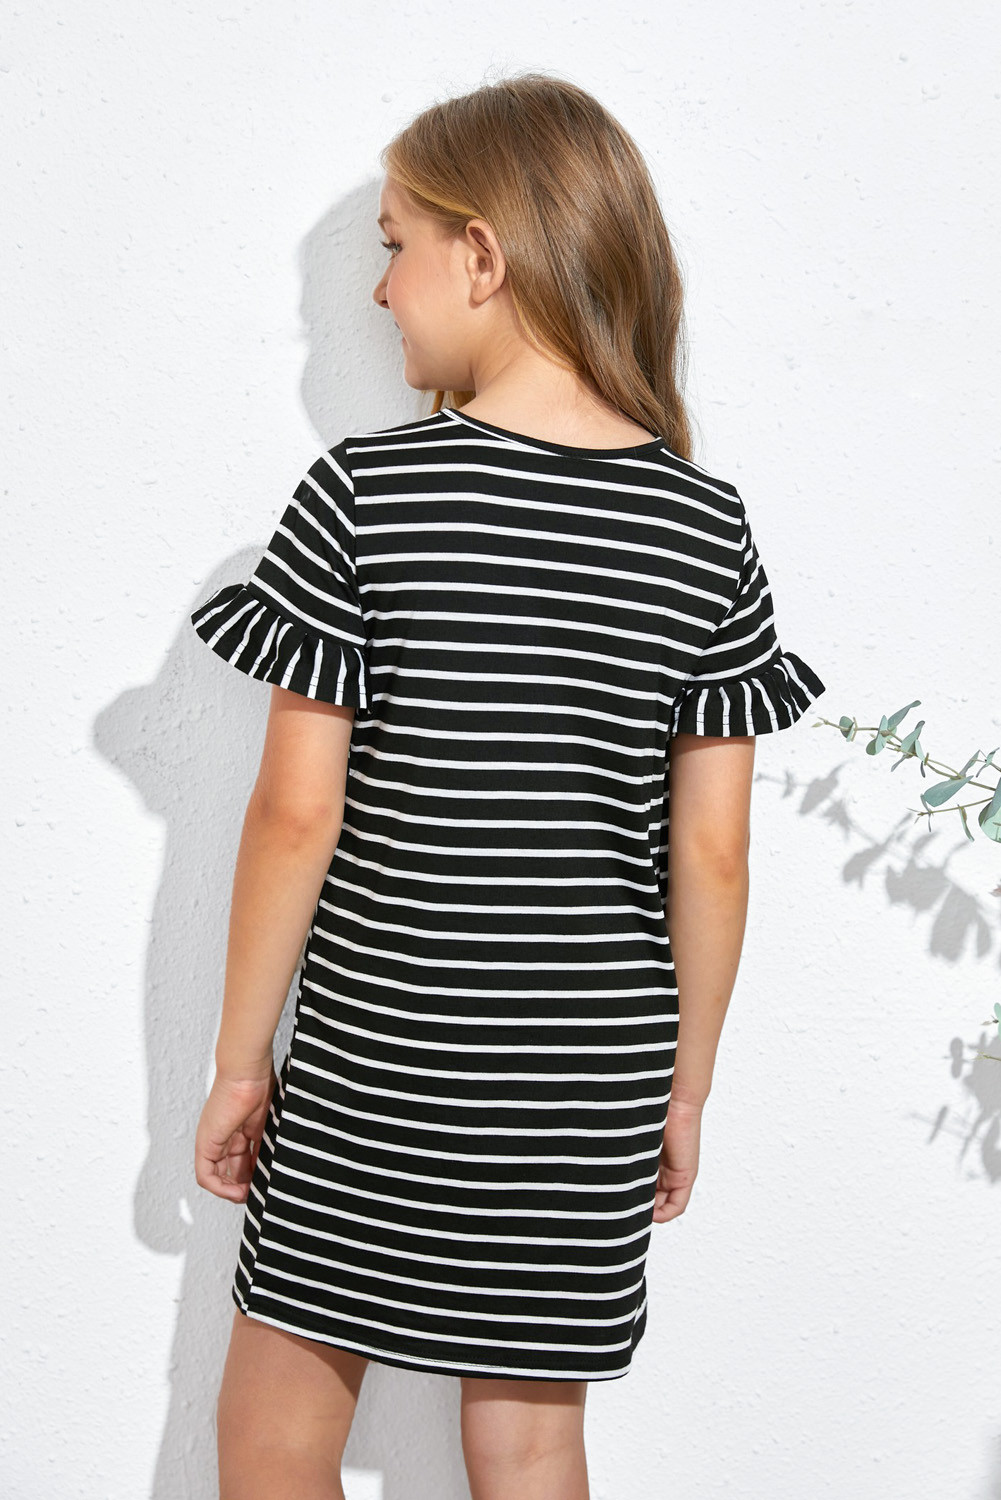 Family Matching Girls' Striped T-shirt Mini Dress with Ruffled Sleeves LC61959